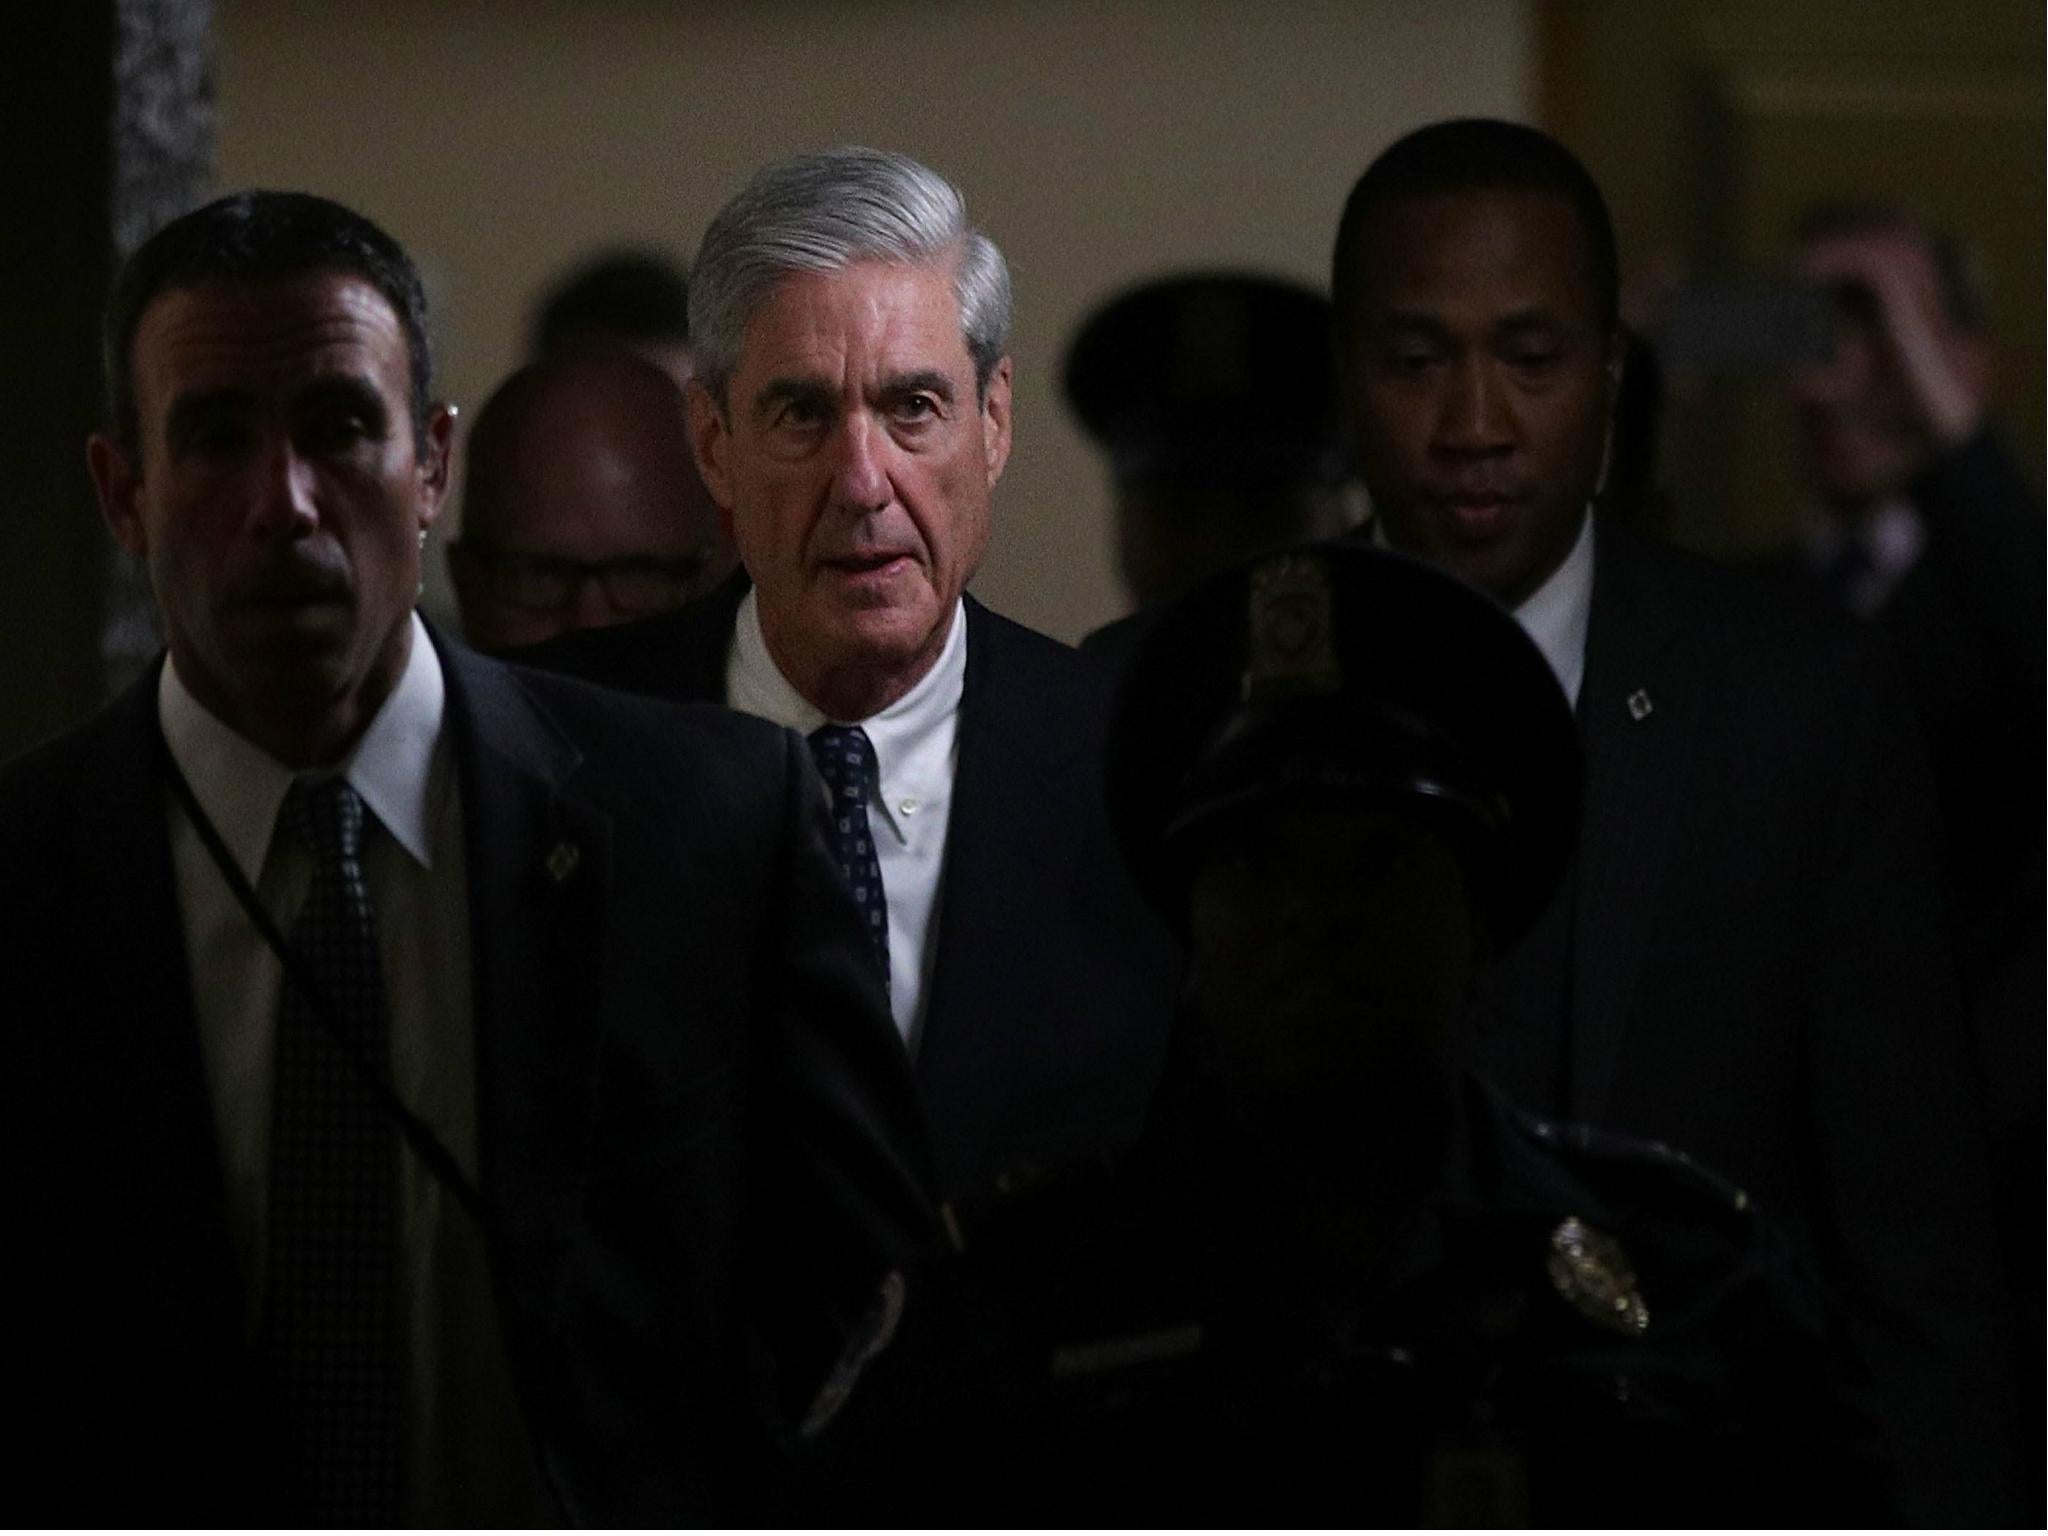 Special counsel Robert Mueller has teamed up with an investigative unit of the IRS, the US tax authority, in the Trump-Russia investigation